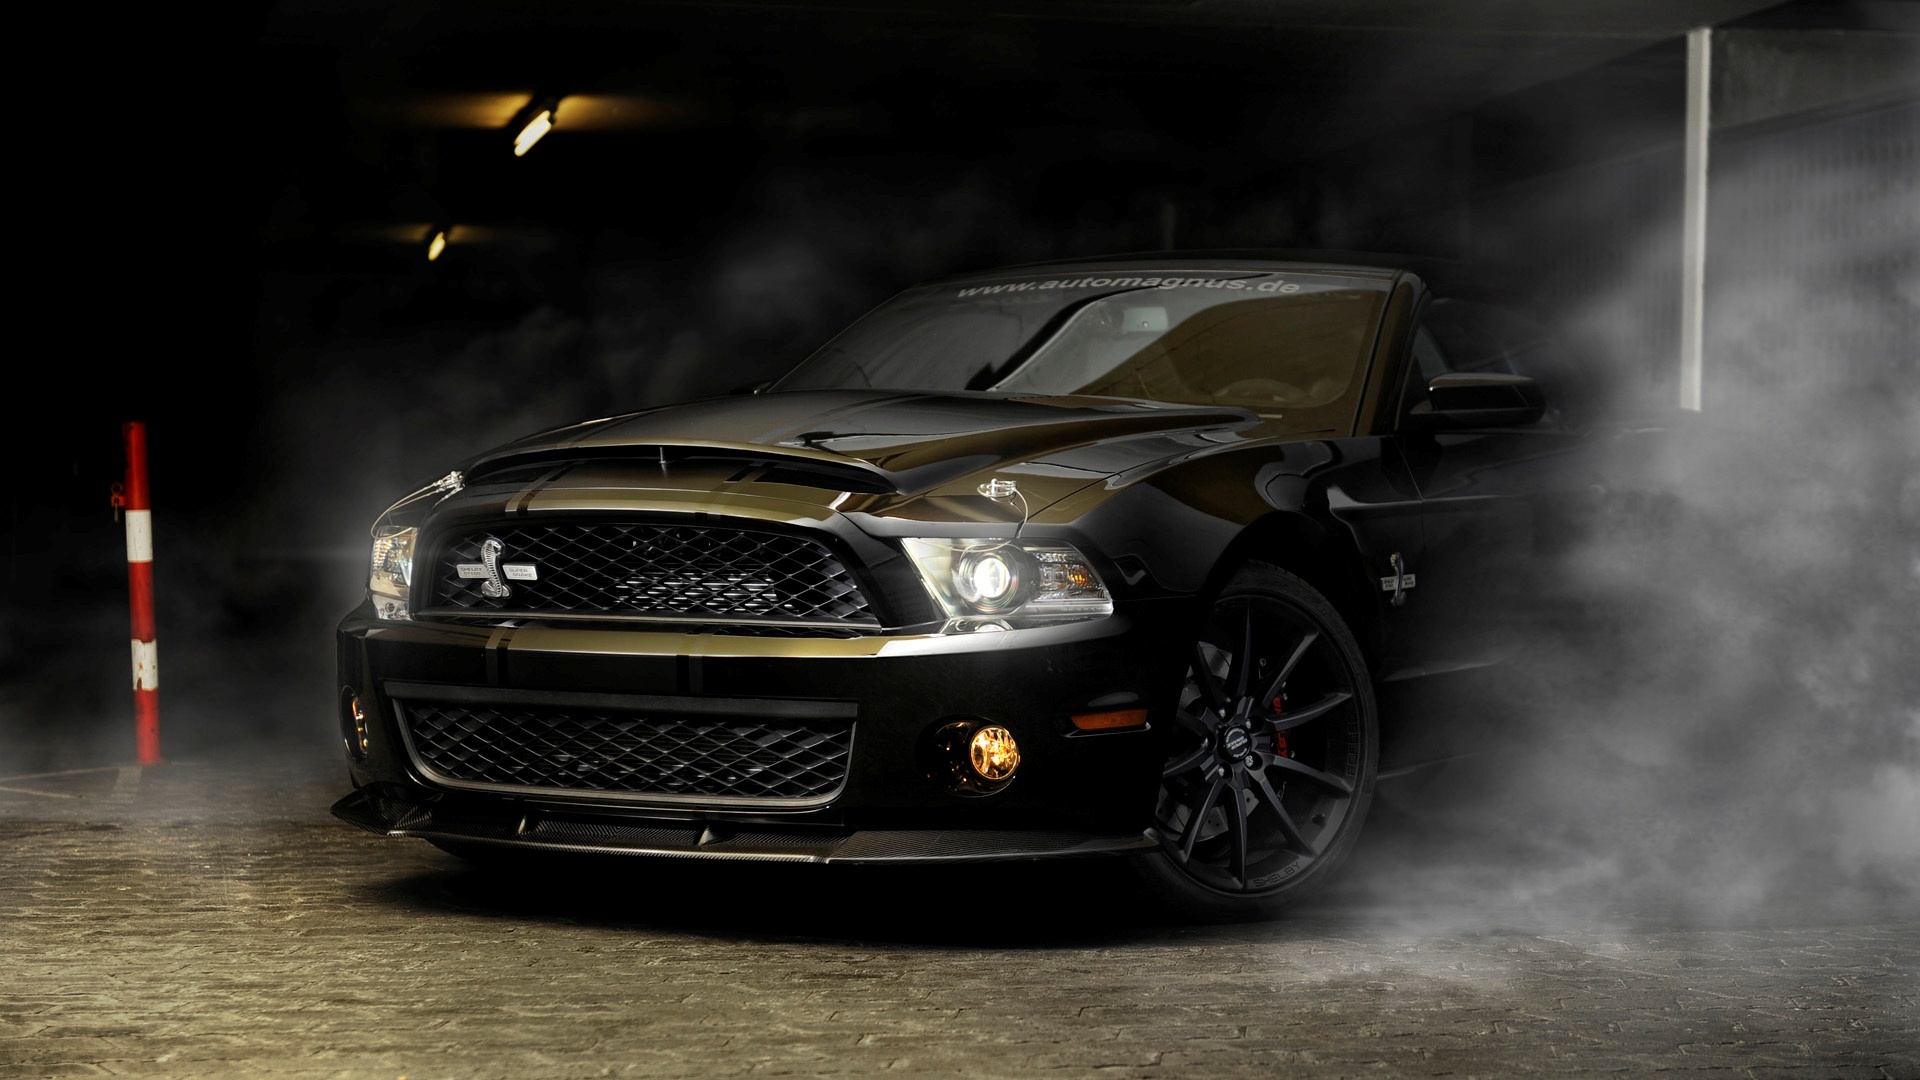 Ford Mustang Gt500 Super Snake Shelby X Close